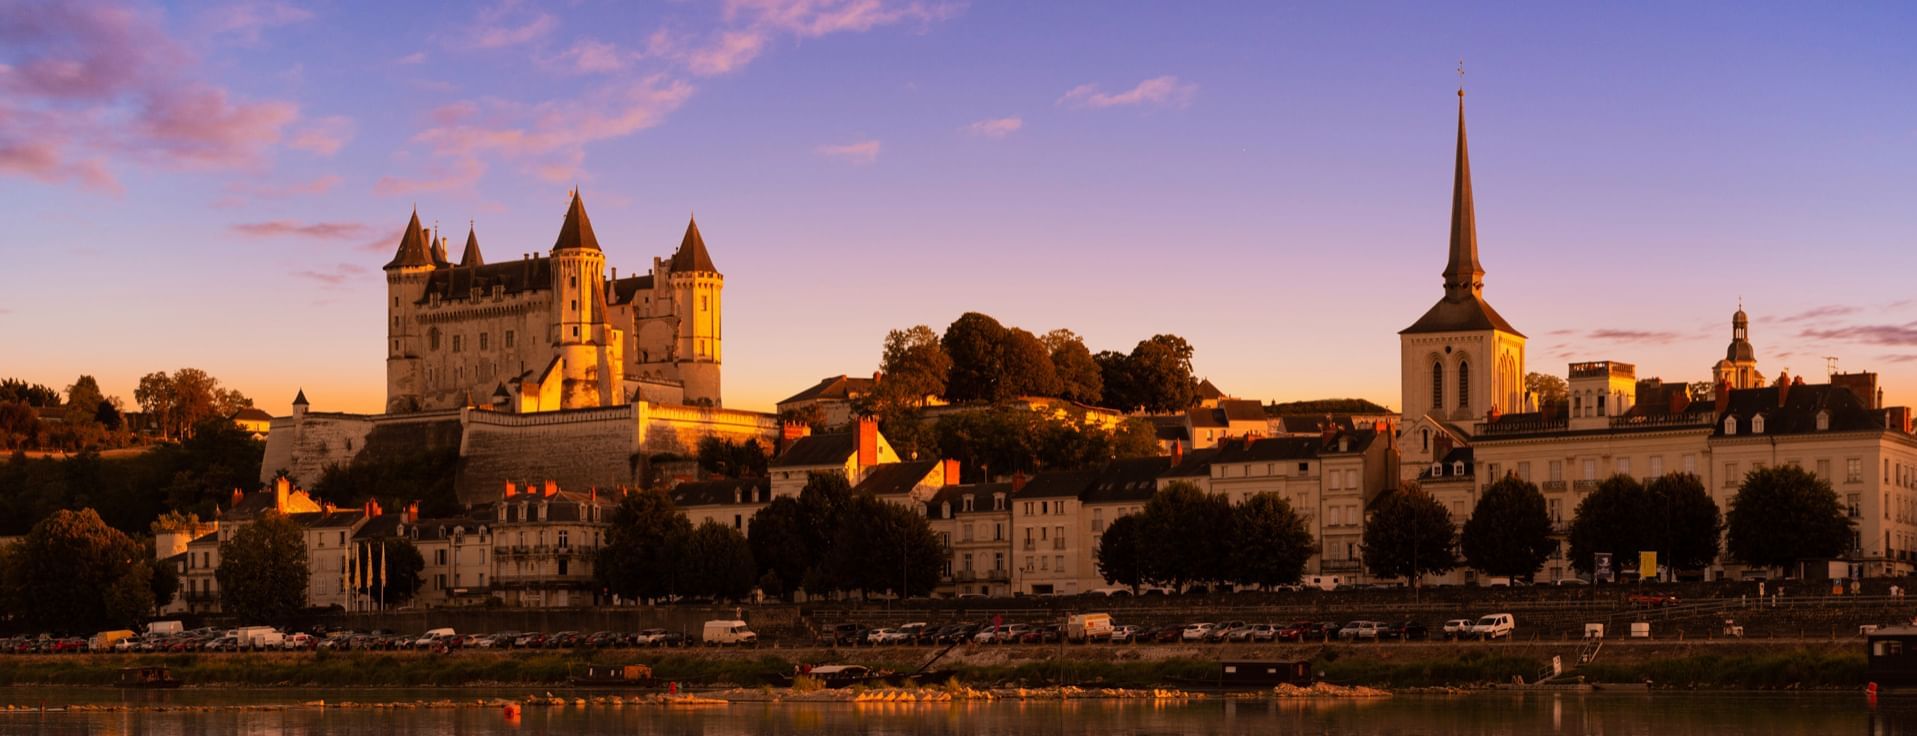 Attractions near Hotel Anne d'Anjou in Saumur, France